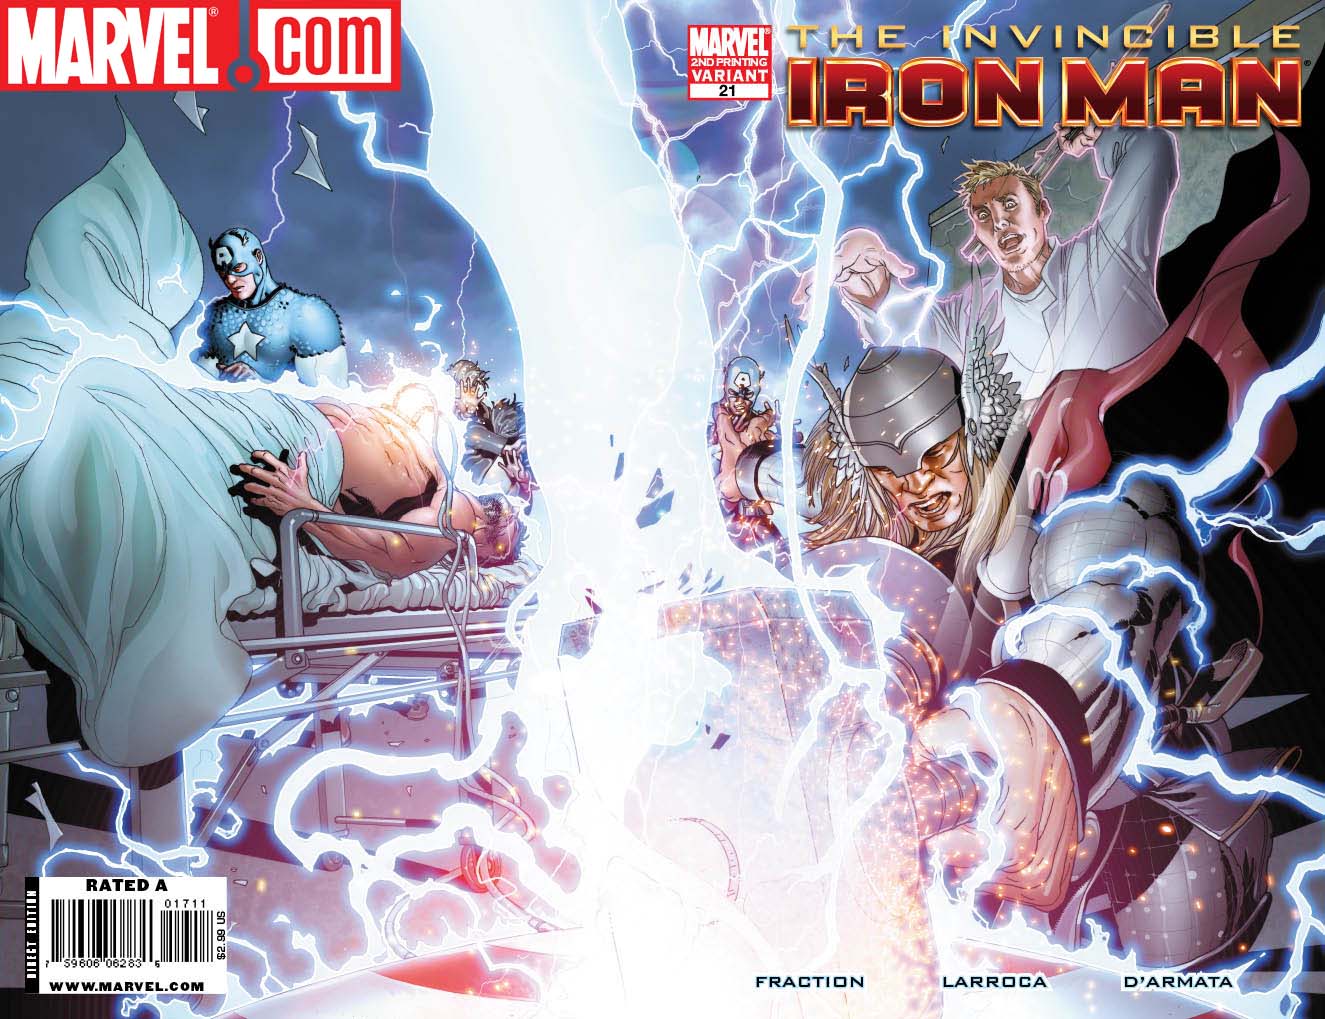 INVINCIBLE IRON MAN #21 SECOND PRINTING VARIANT